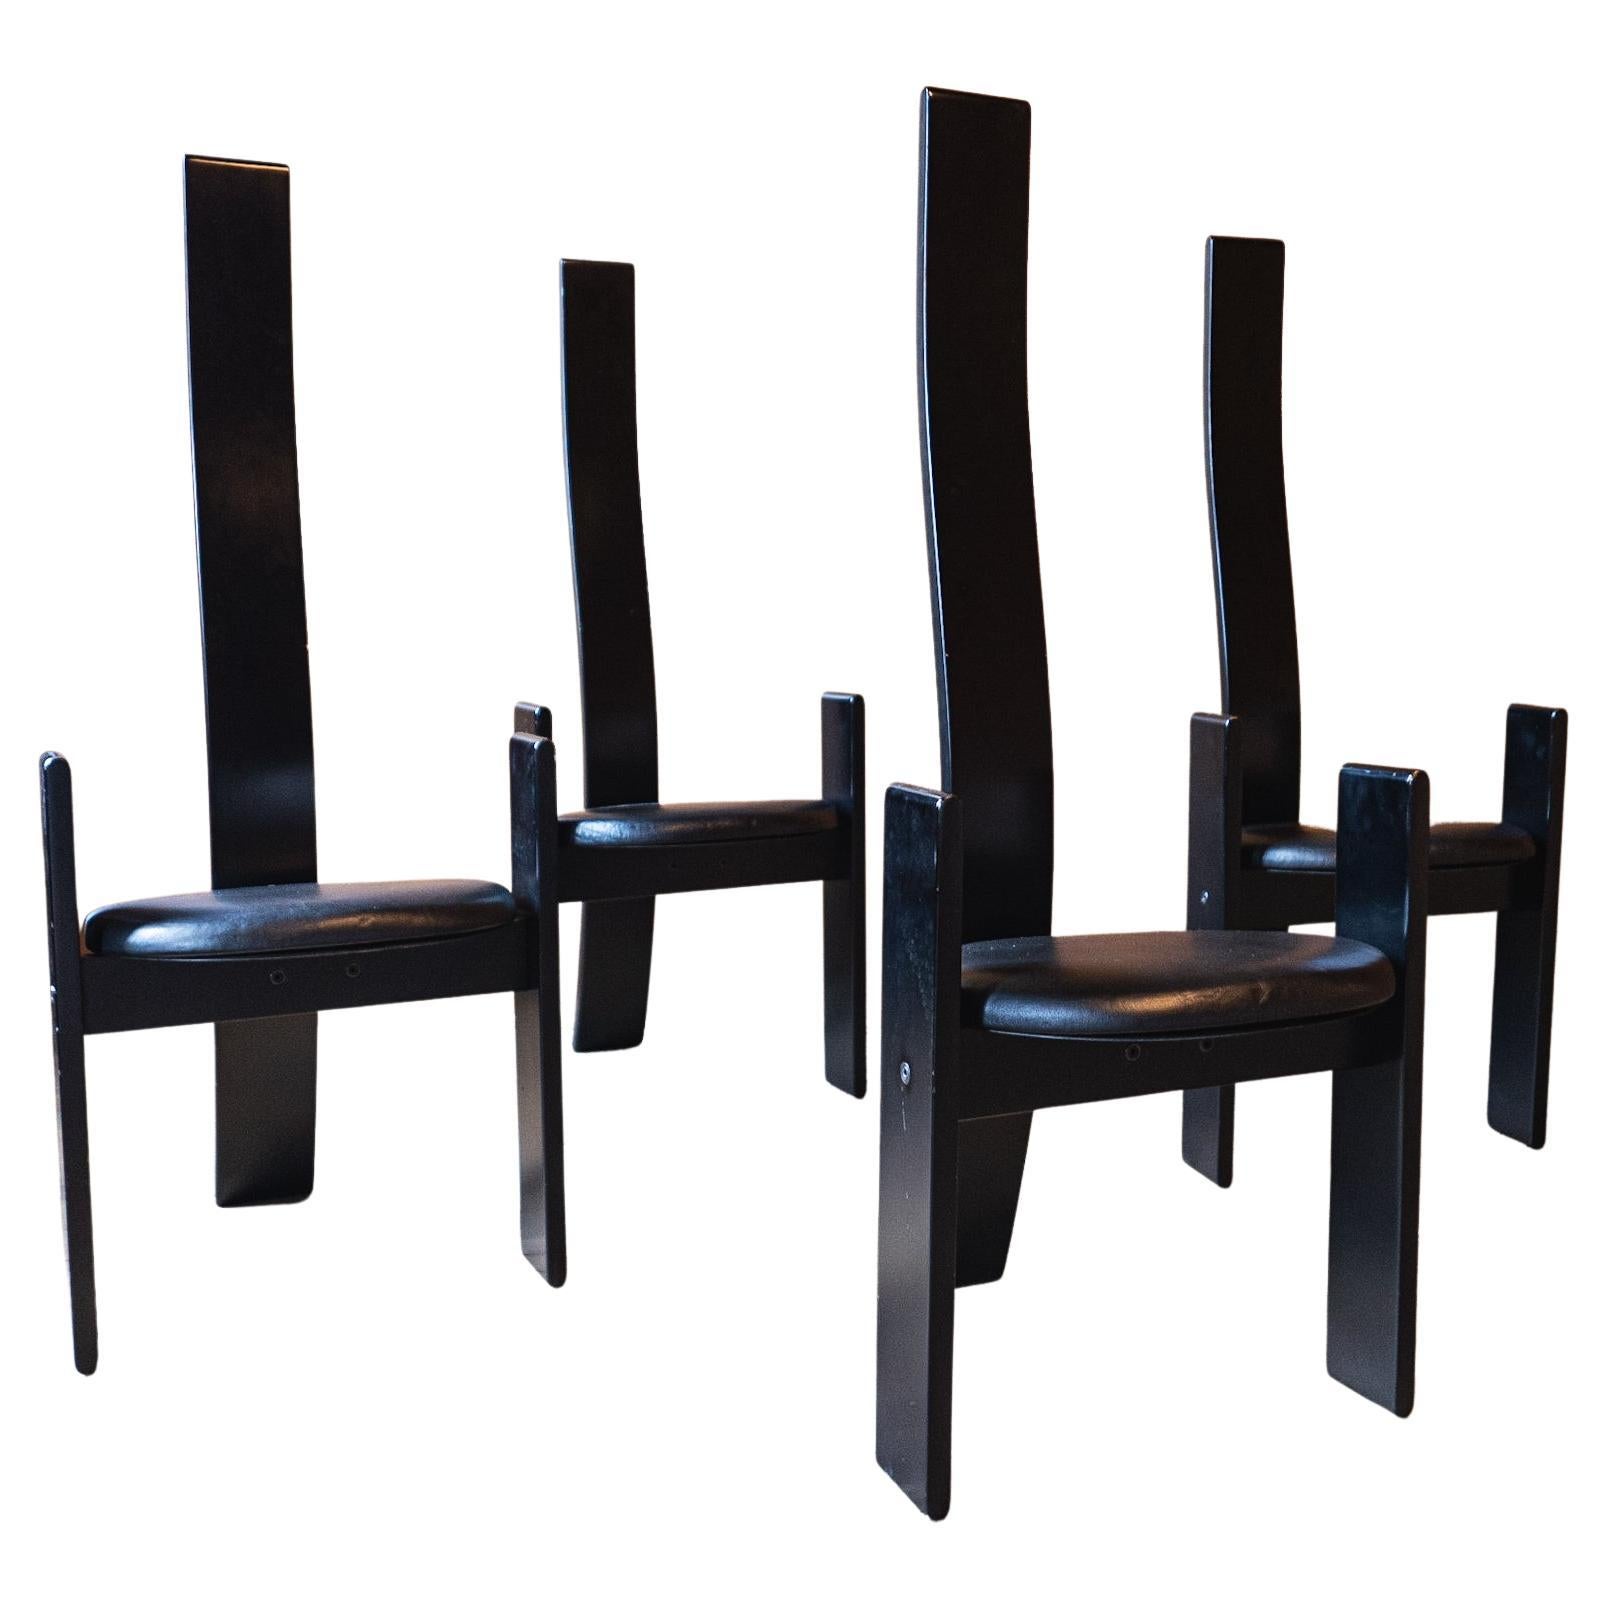 Mid-Century Modern Wooden Dining Chairs "Golem" by Vico Magistretti, Italy 1969